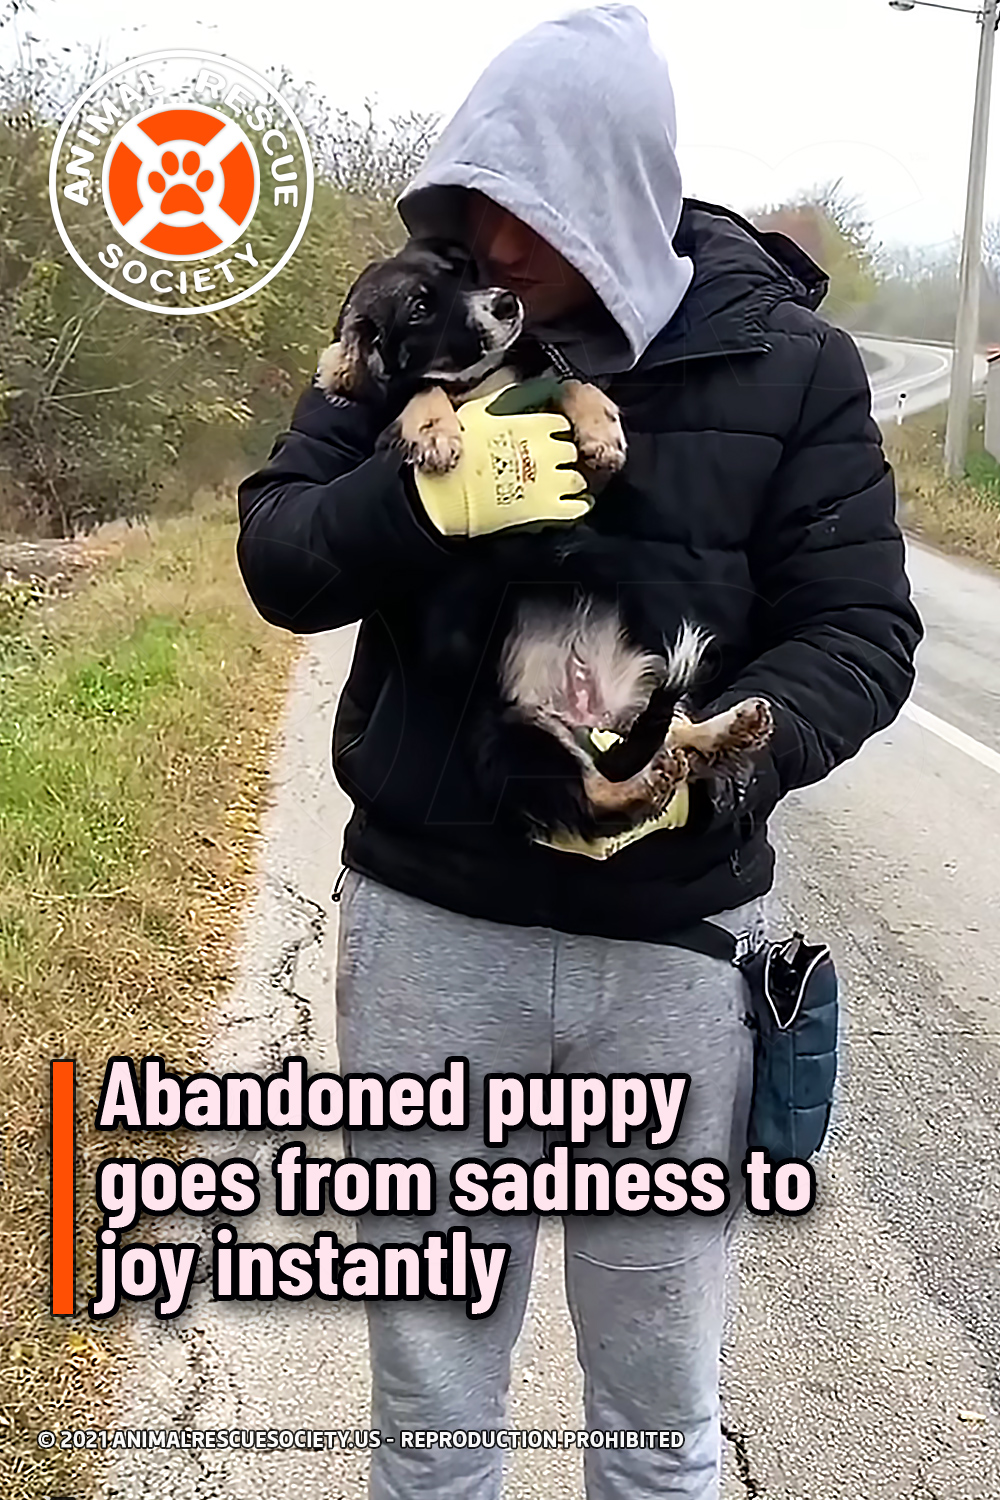 Abandoned puppy goes from sadness to joy instantly